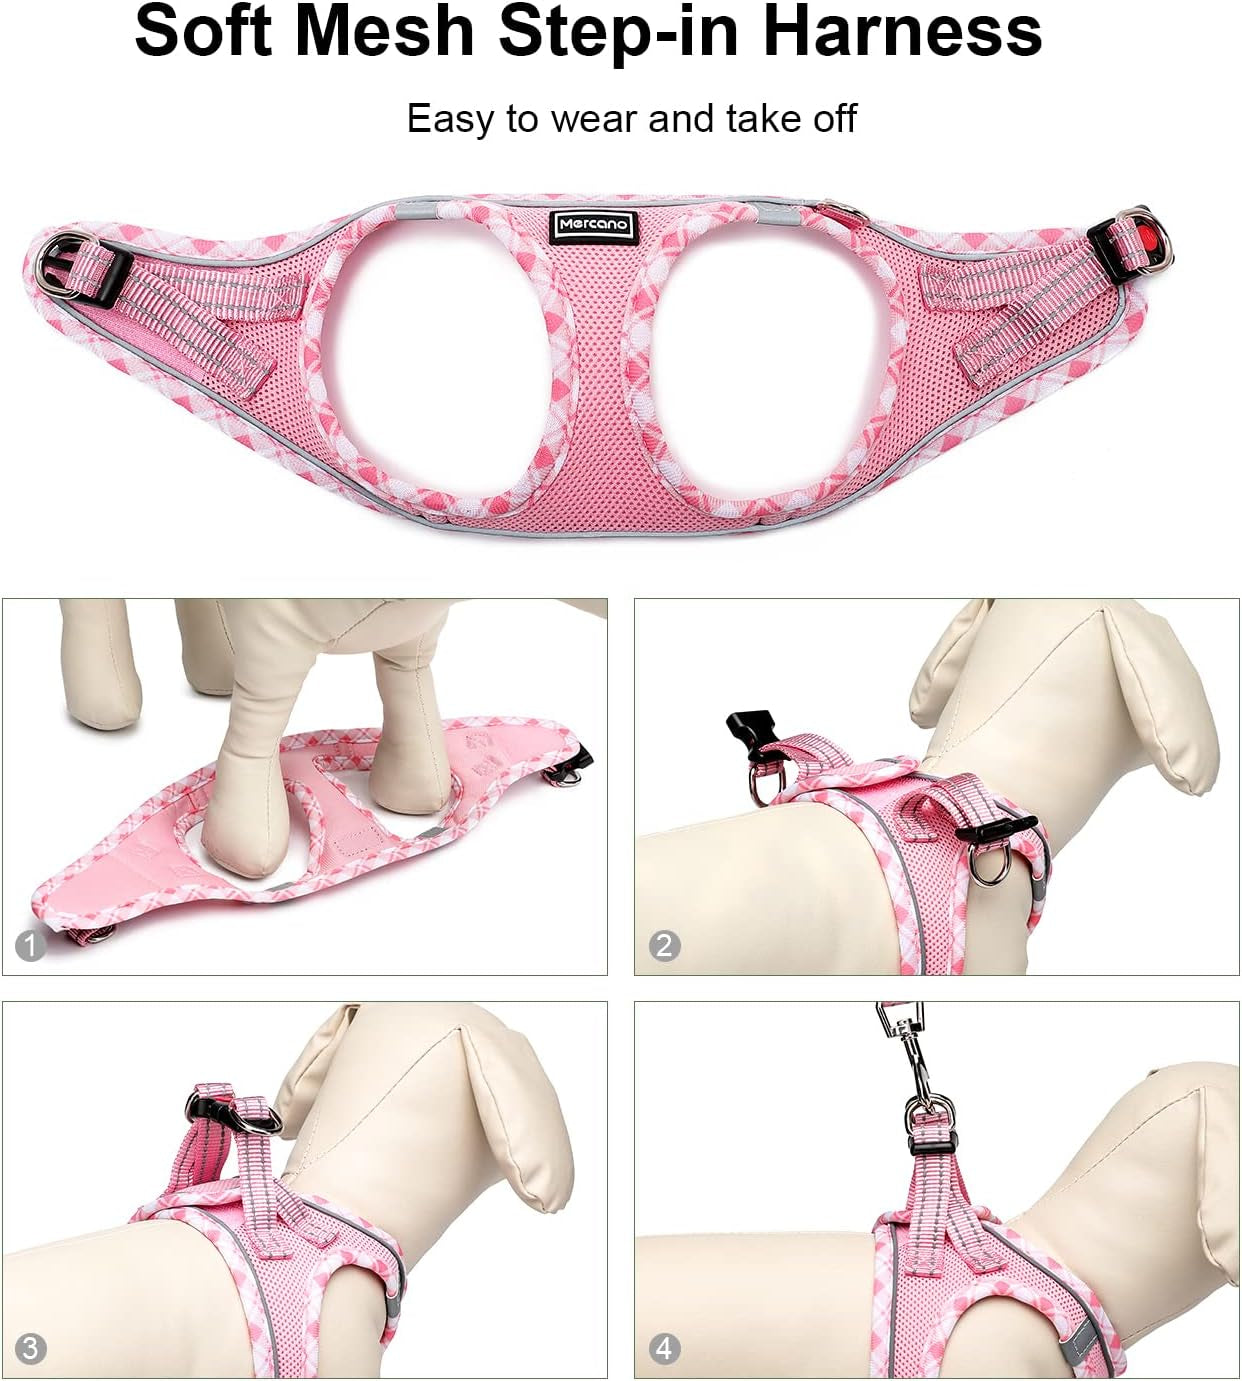 Soft Mesh Dog Harness and Leash Set, No-Chock Step-In Reflective Breathable Lightweight Easy Walk Escape Proof Vest Harnesses with Safety Buckle for Small Medium Dogs, Cats (Pink, S)